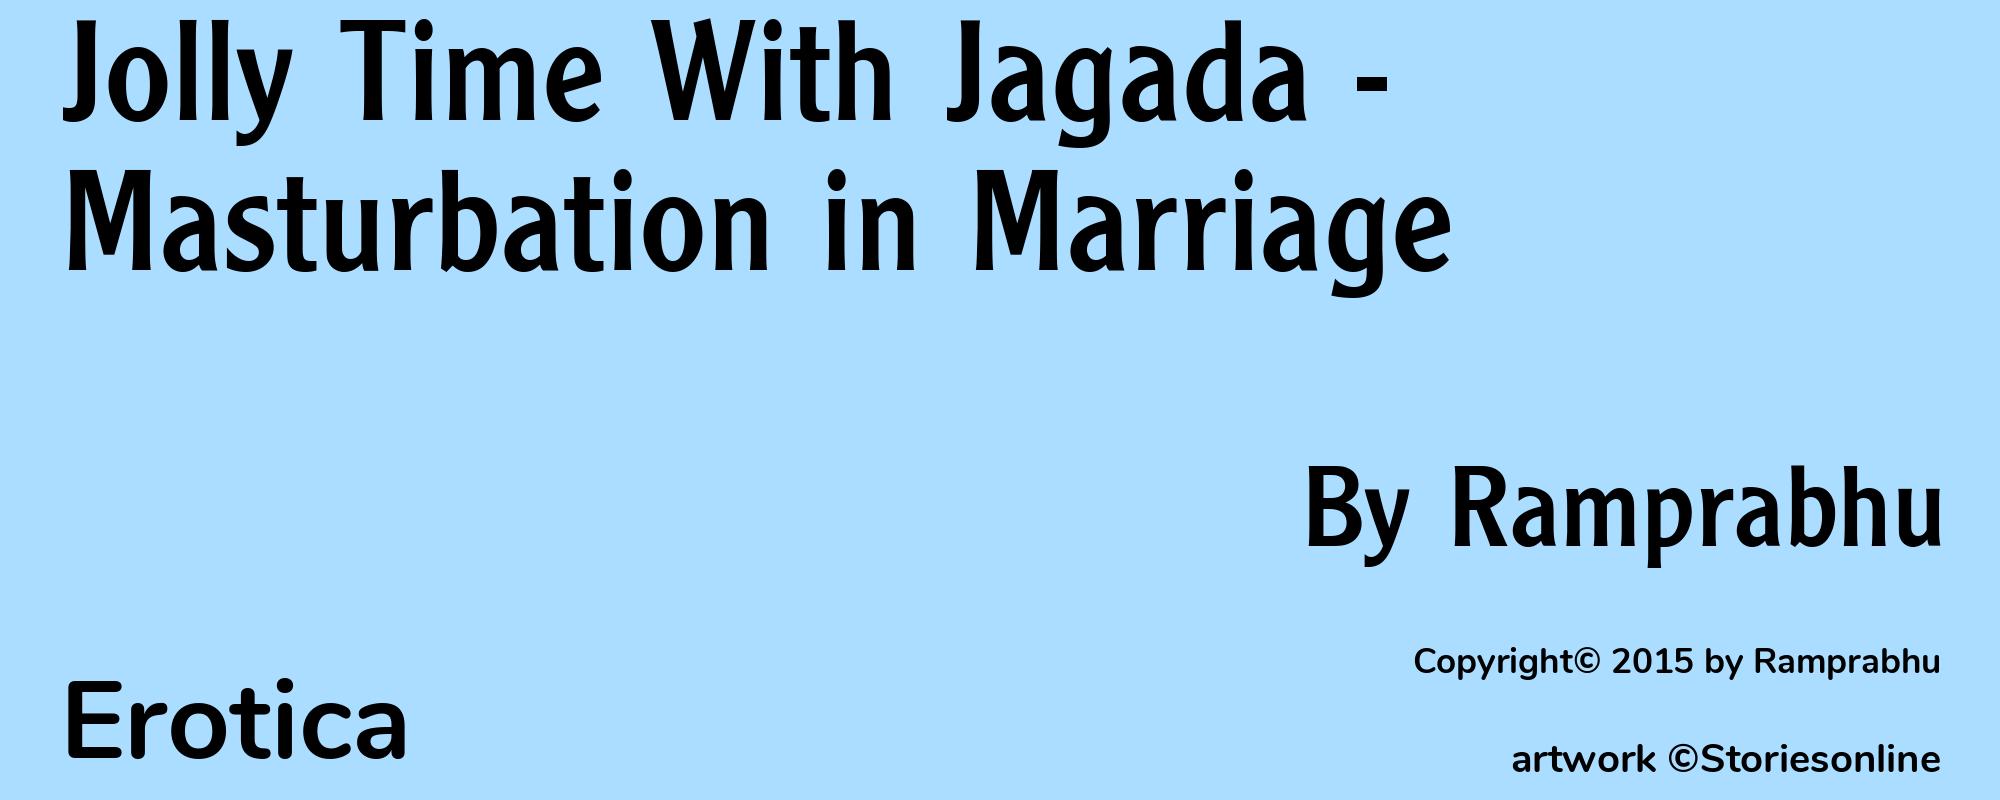 Jolly Time With Jagada - Masturbation in Marriage - Cover